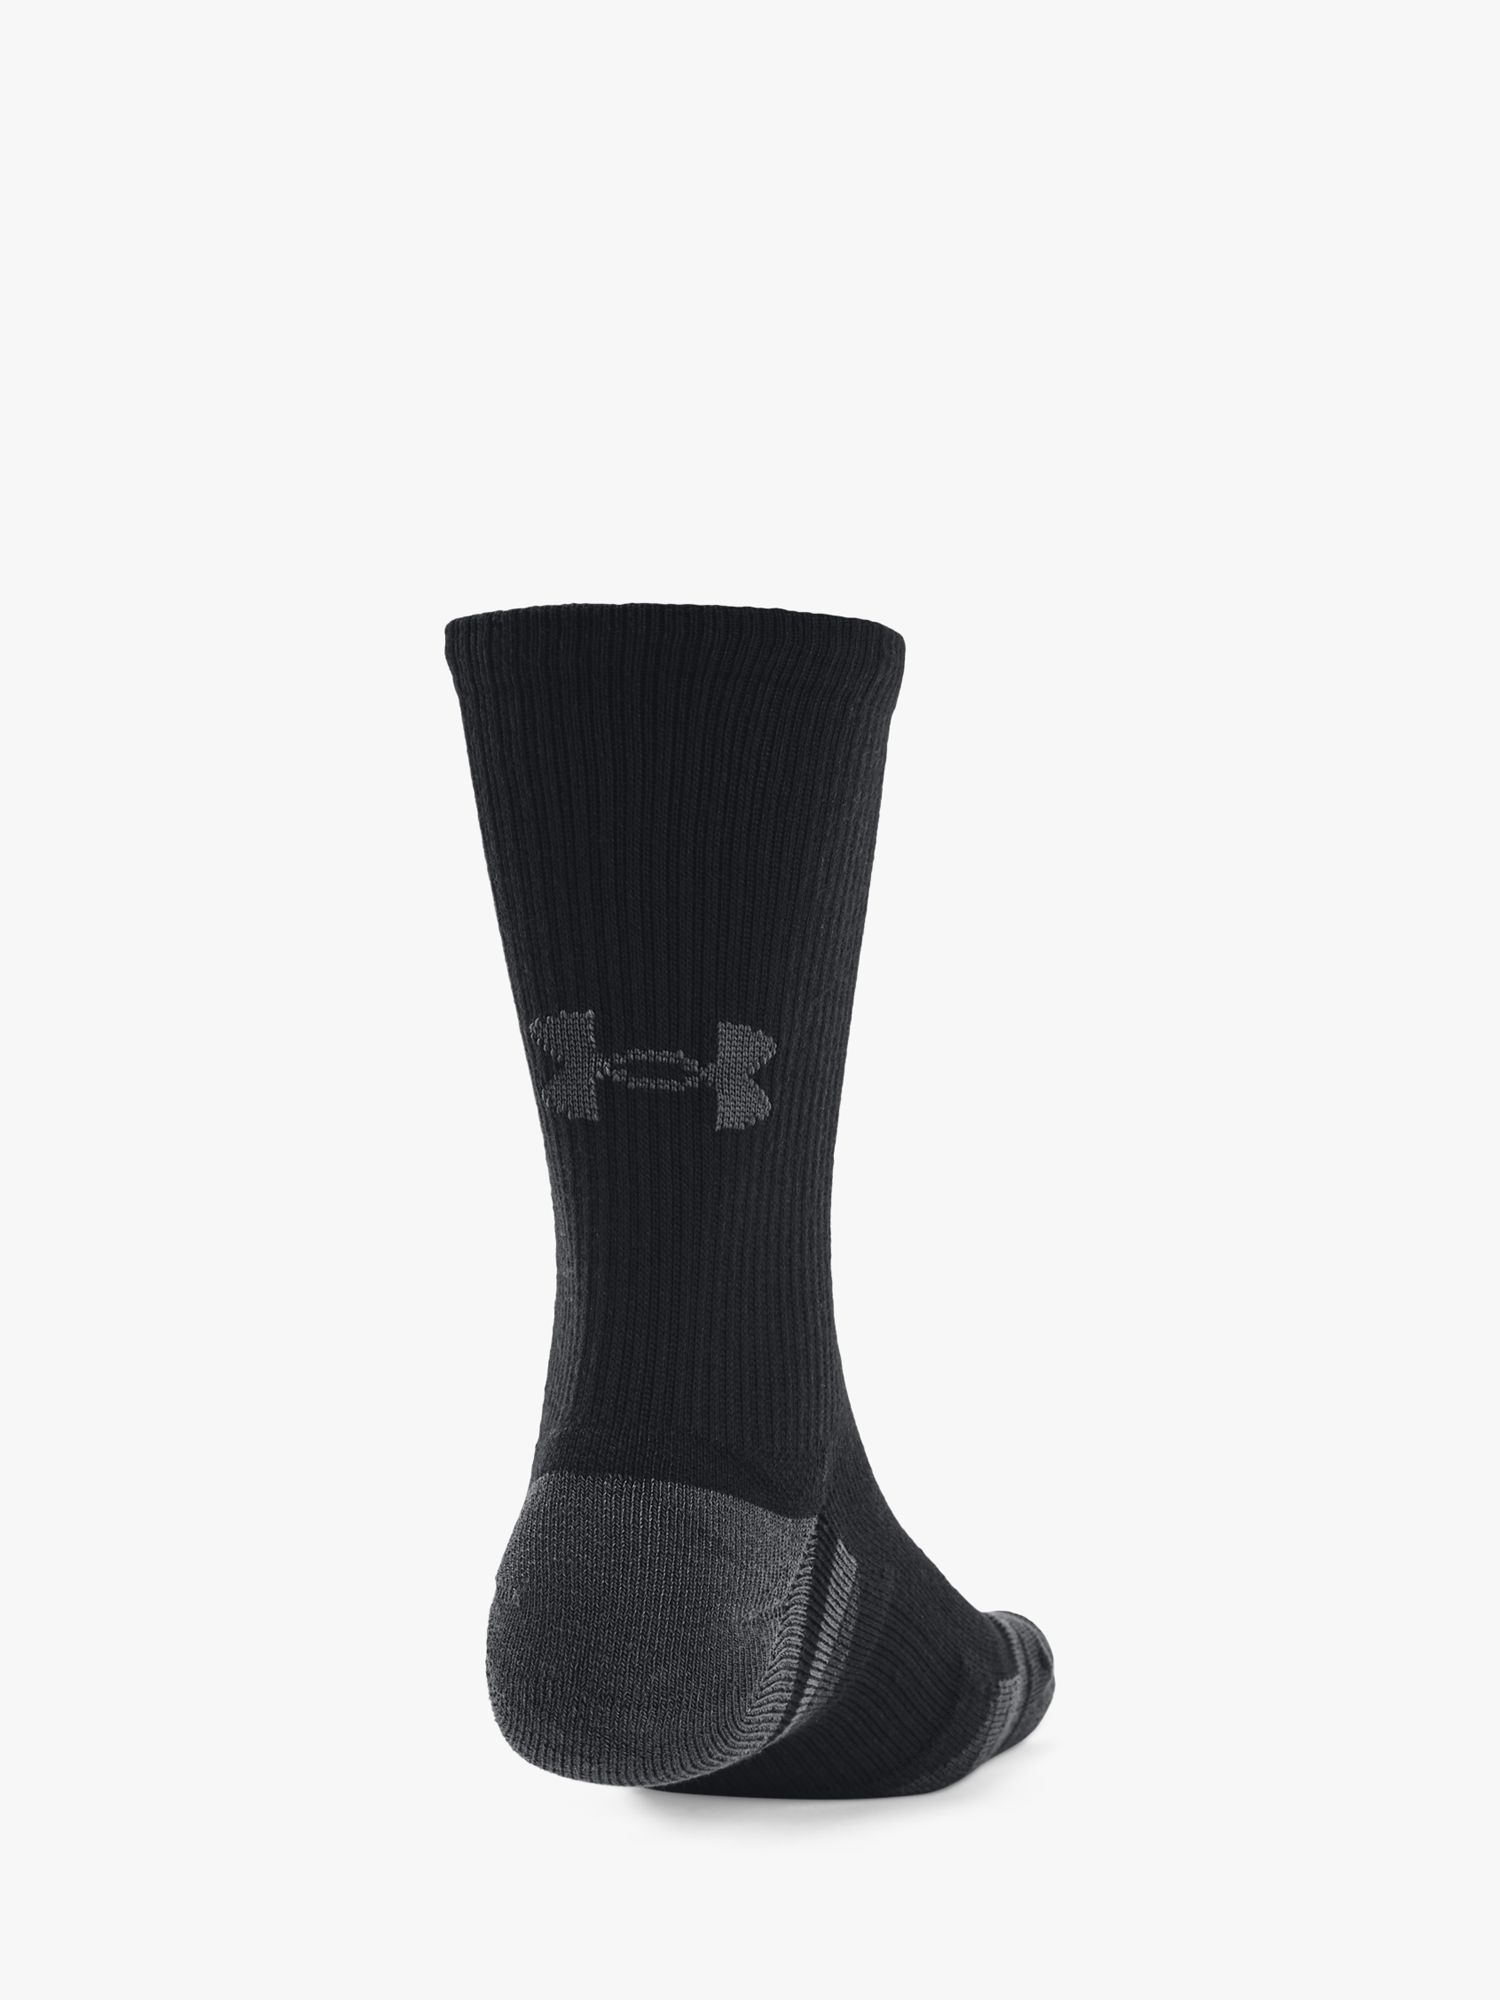 Buy Under Armour Performance Tech Crew Socks, Pack of 3, Blacka/Jet Gray Online at johnlewis.com